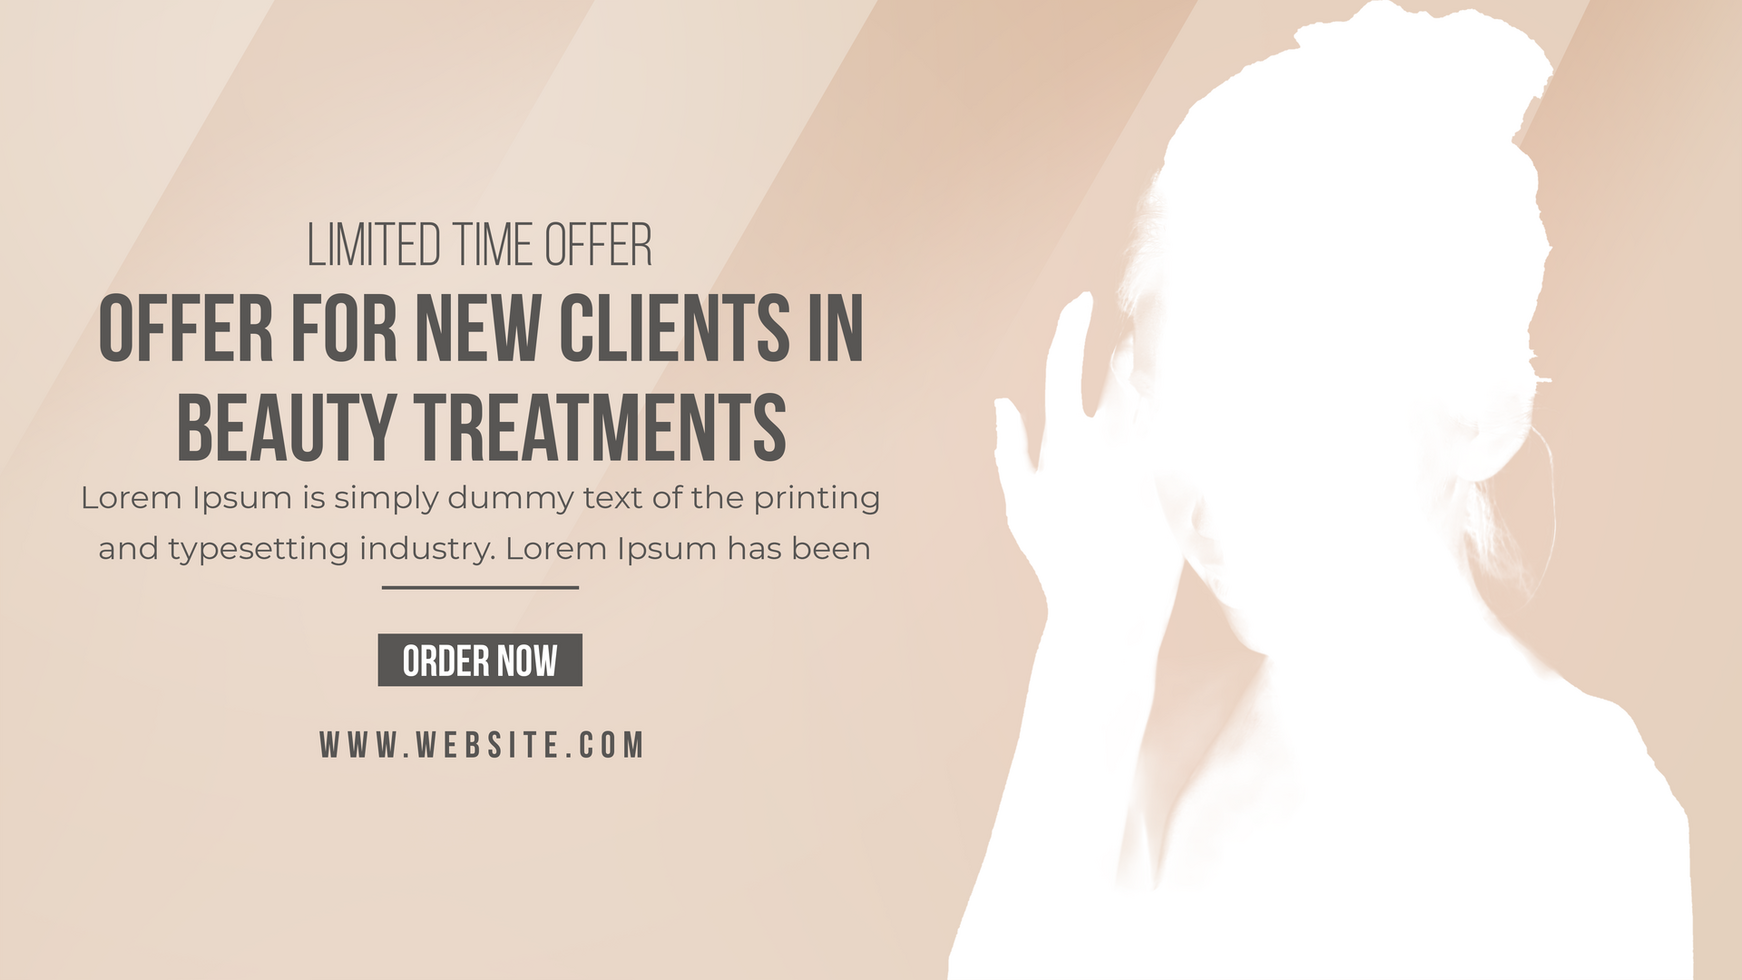 Natural women's skincare and skin treatment shop promotional web banner editable PSD file